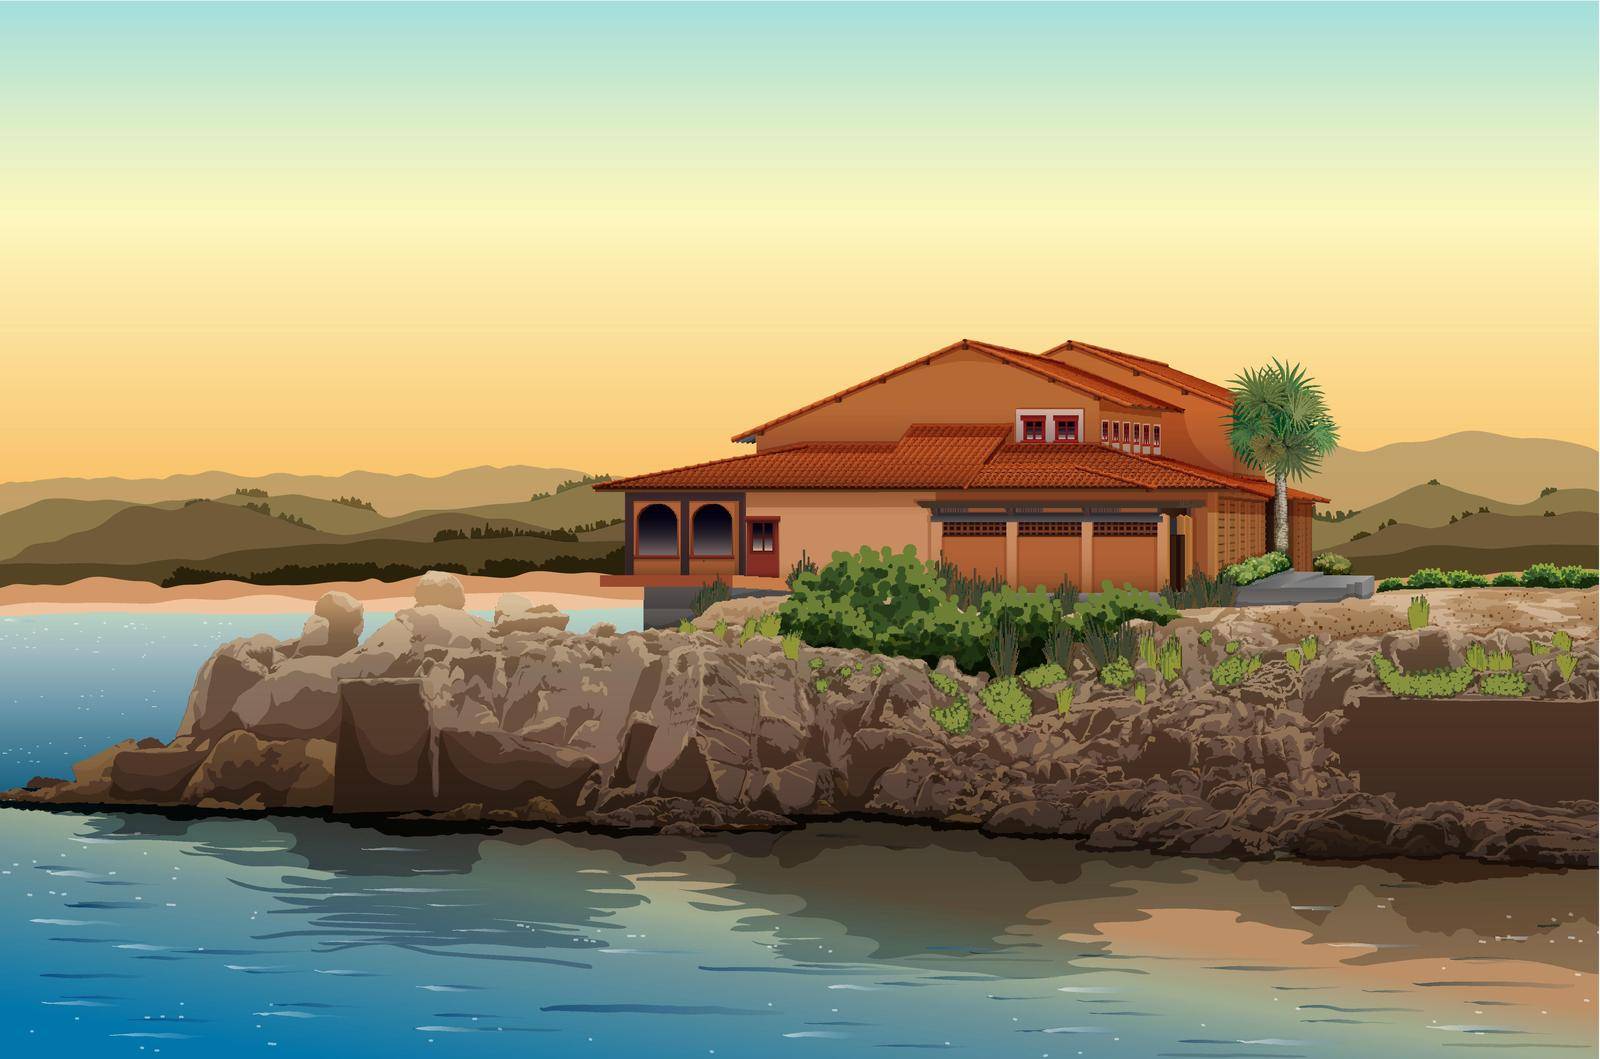 Illustration of a house by the lake